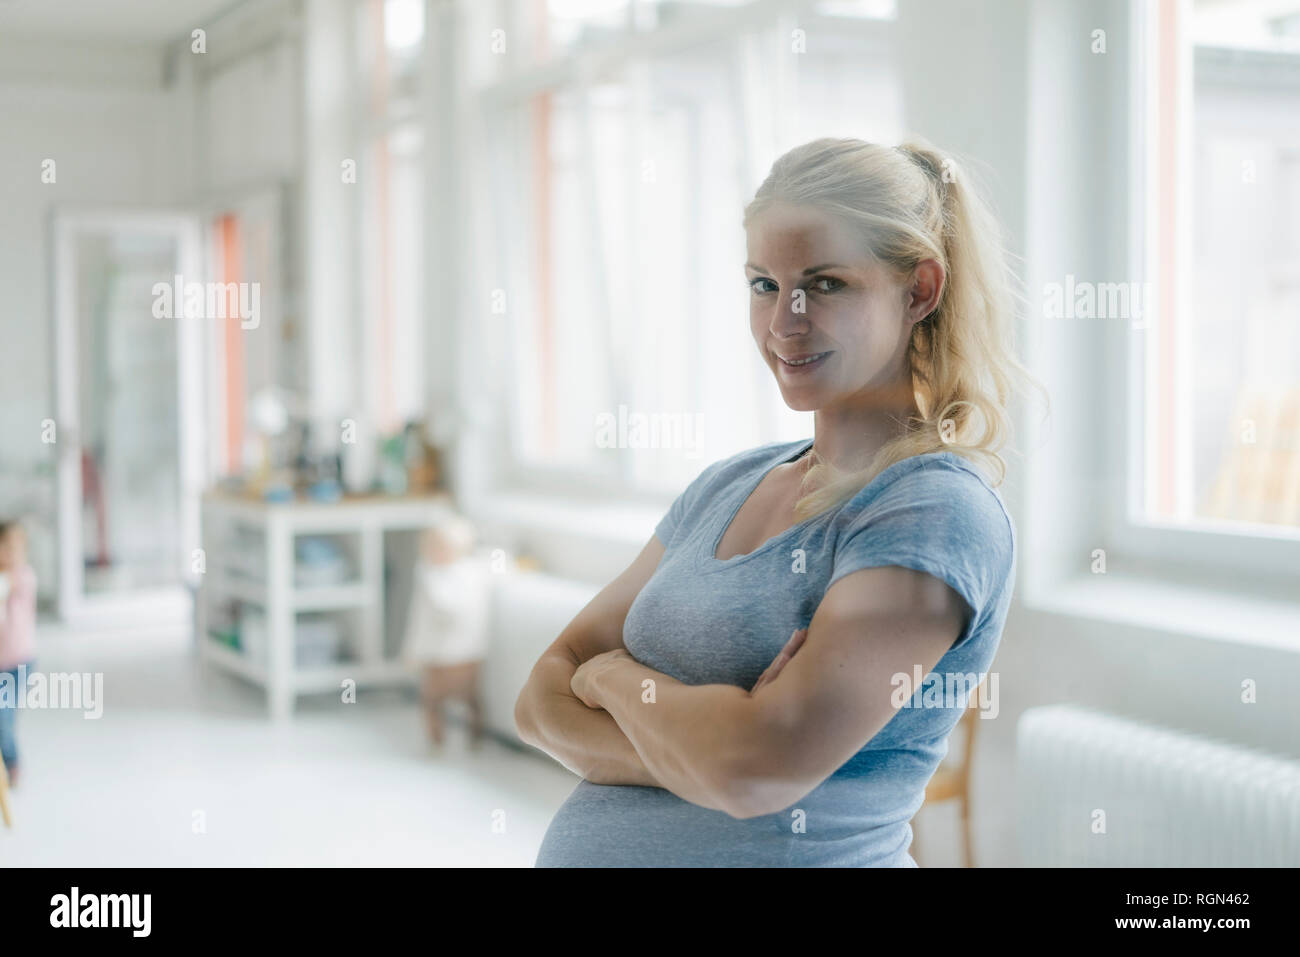 Portrait of smiling pregnant woman in a bright room Stock Photo